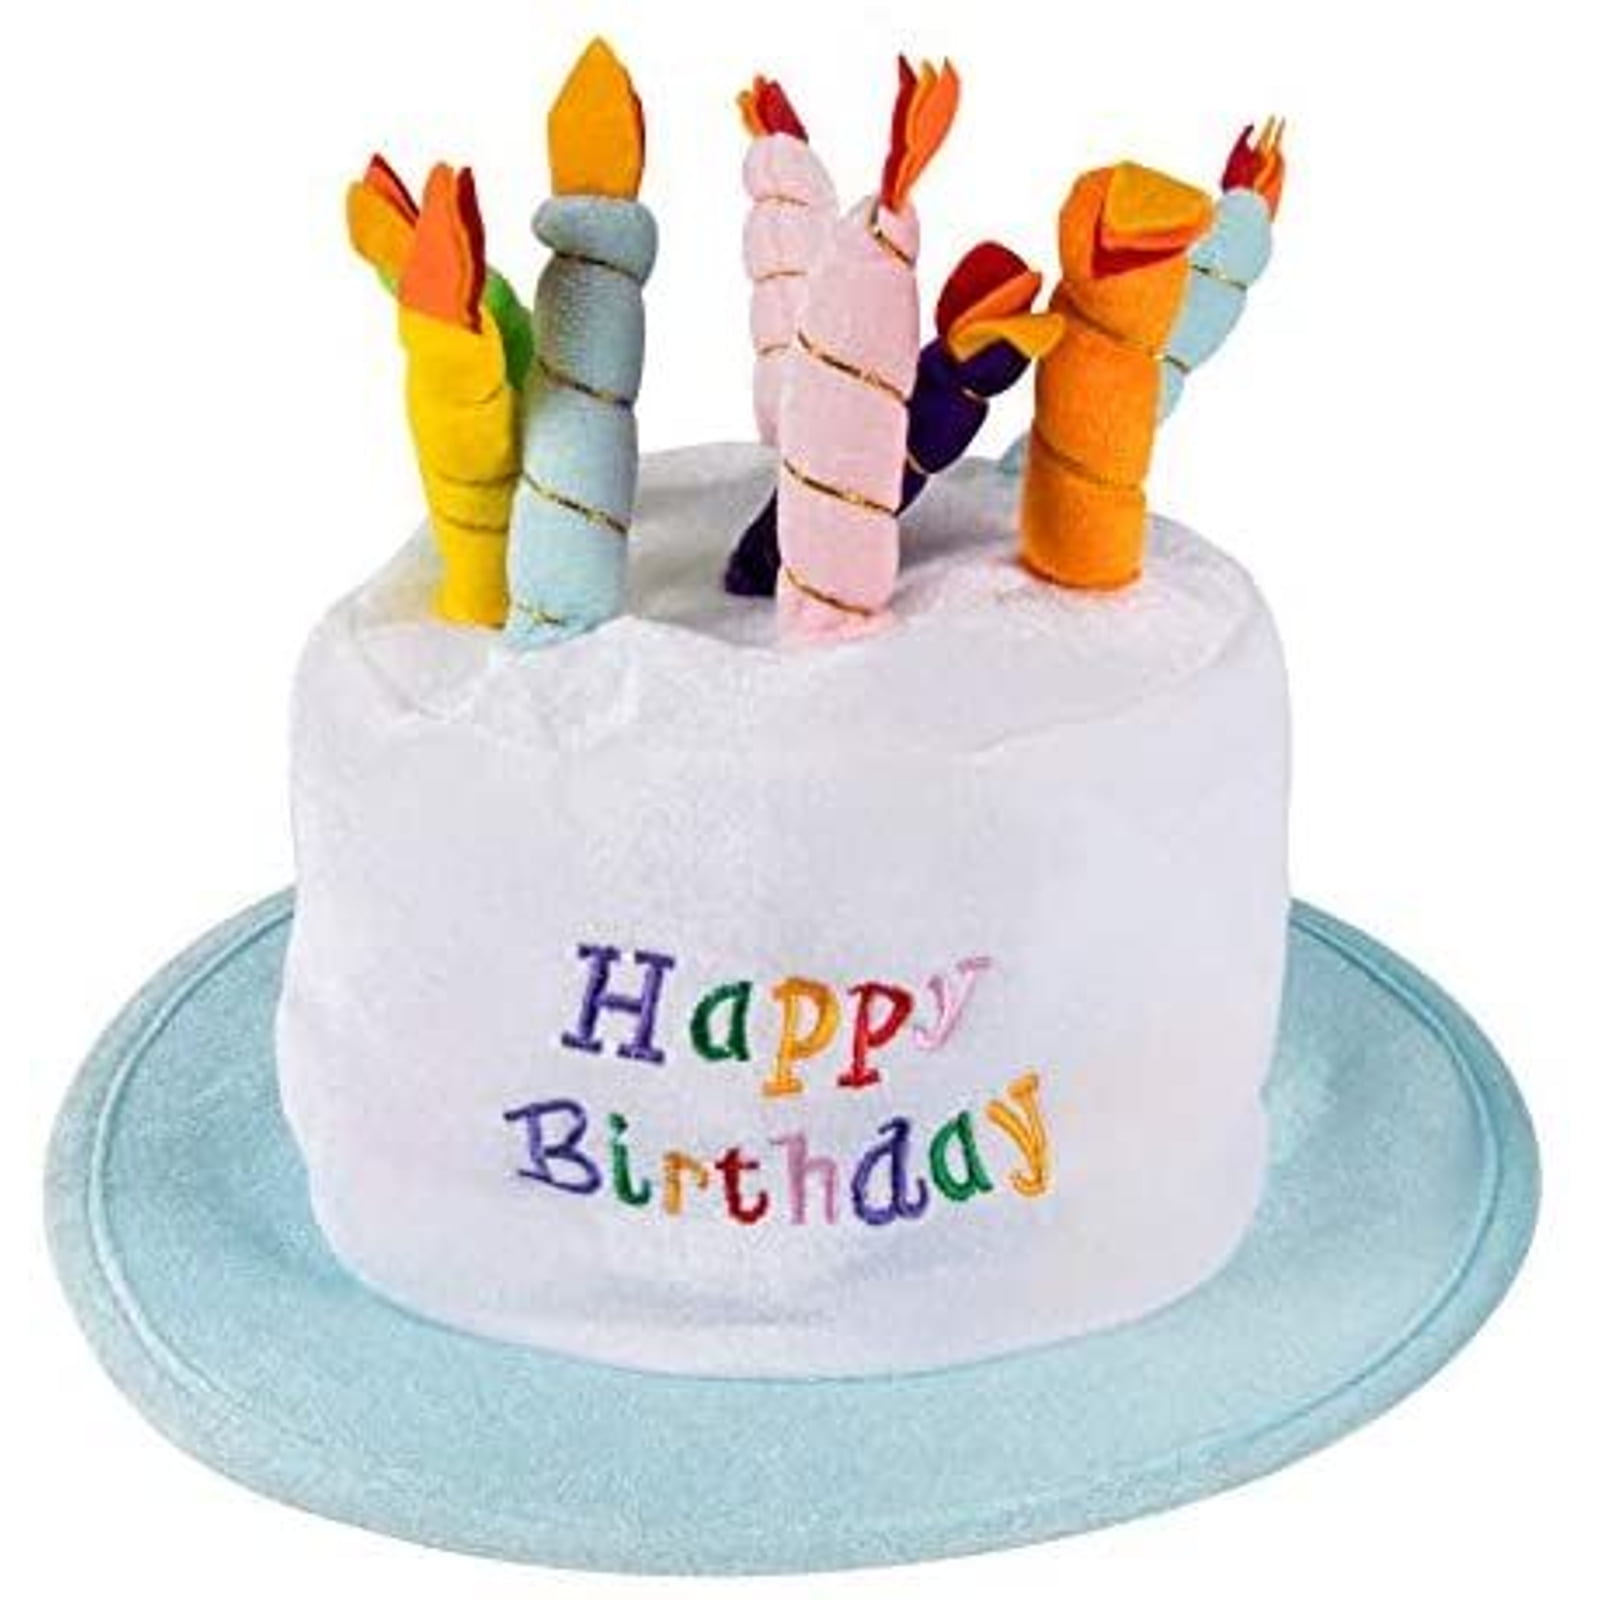 Happy Birthday Cake With Candles Novelty Party Food Fancy Dress Hat Accessory 